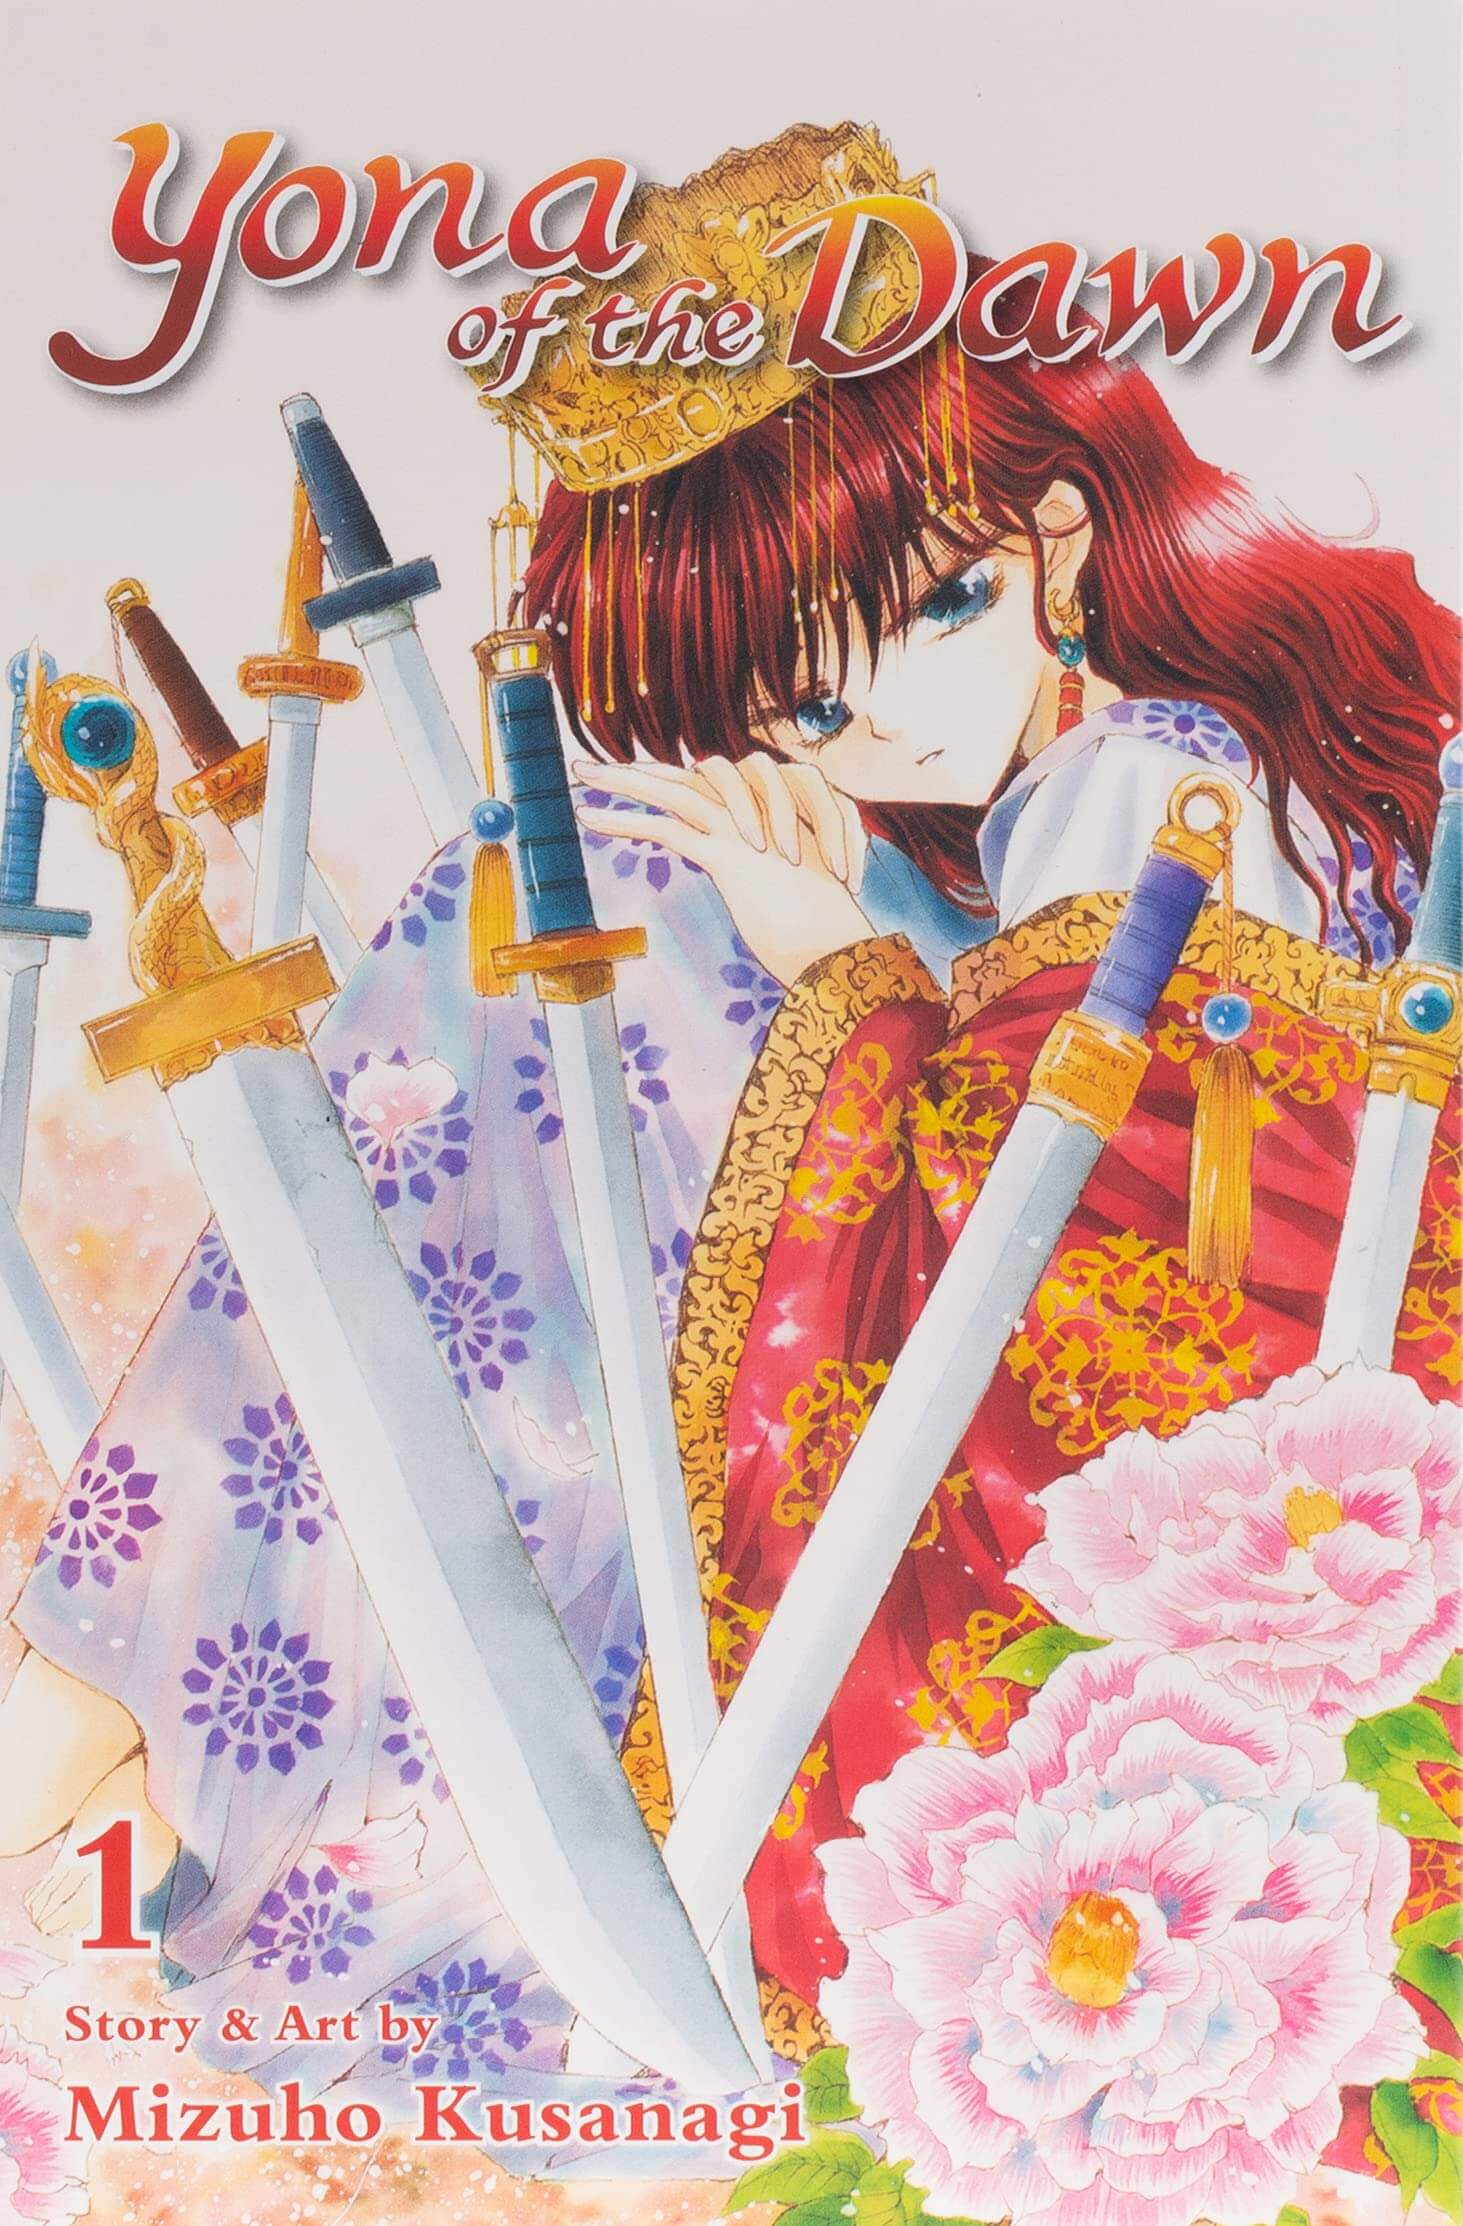 Cover of the first volume of the Yona of the Dawn manga.